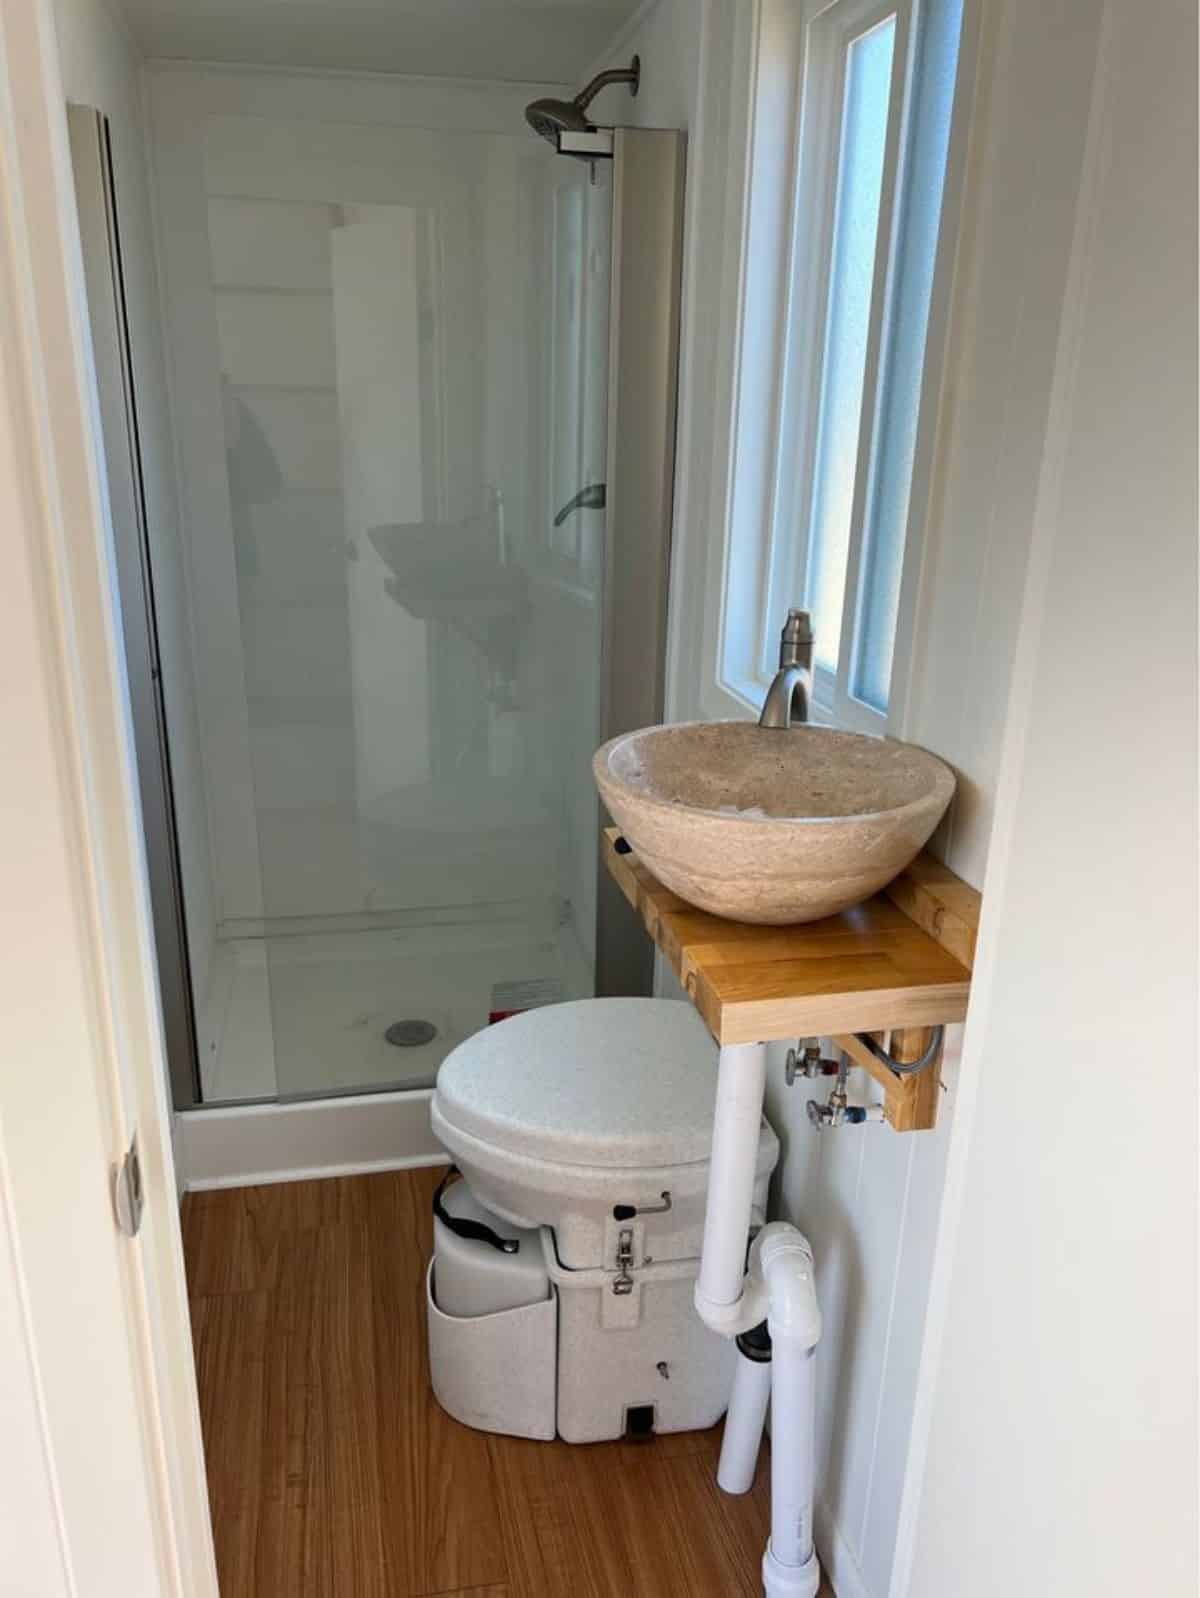 bathroom of tiny double lofted home has all the standard fittings and composting toilet